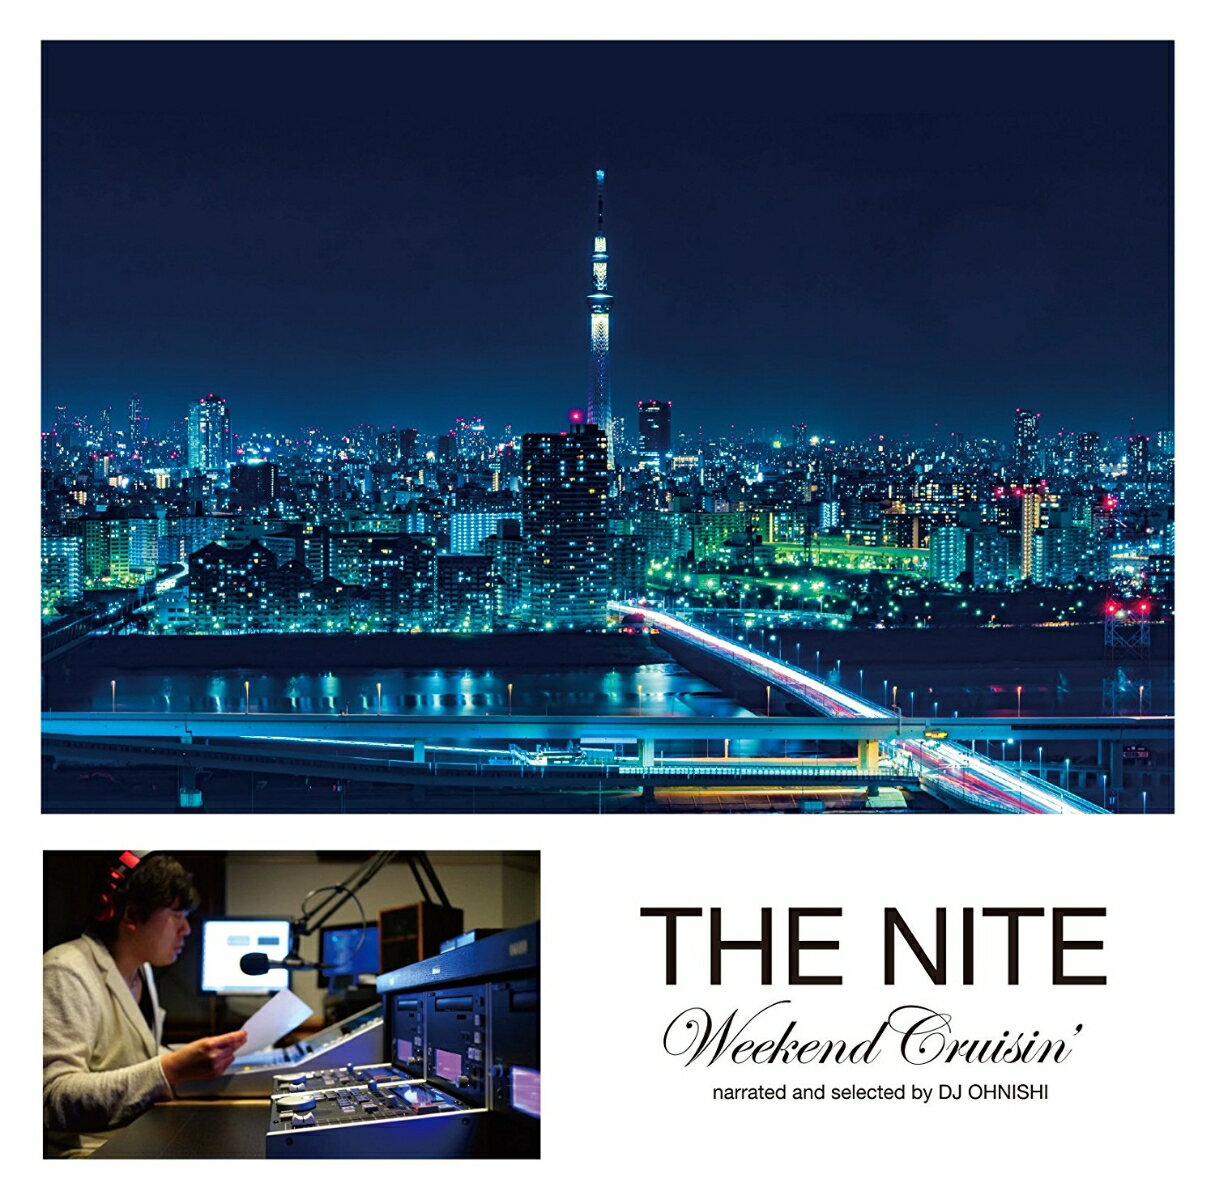 THE NITE Weekend Cruisin' narrated and selected by DJ OHNISHI